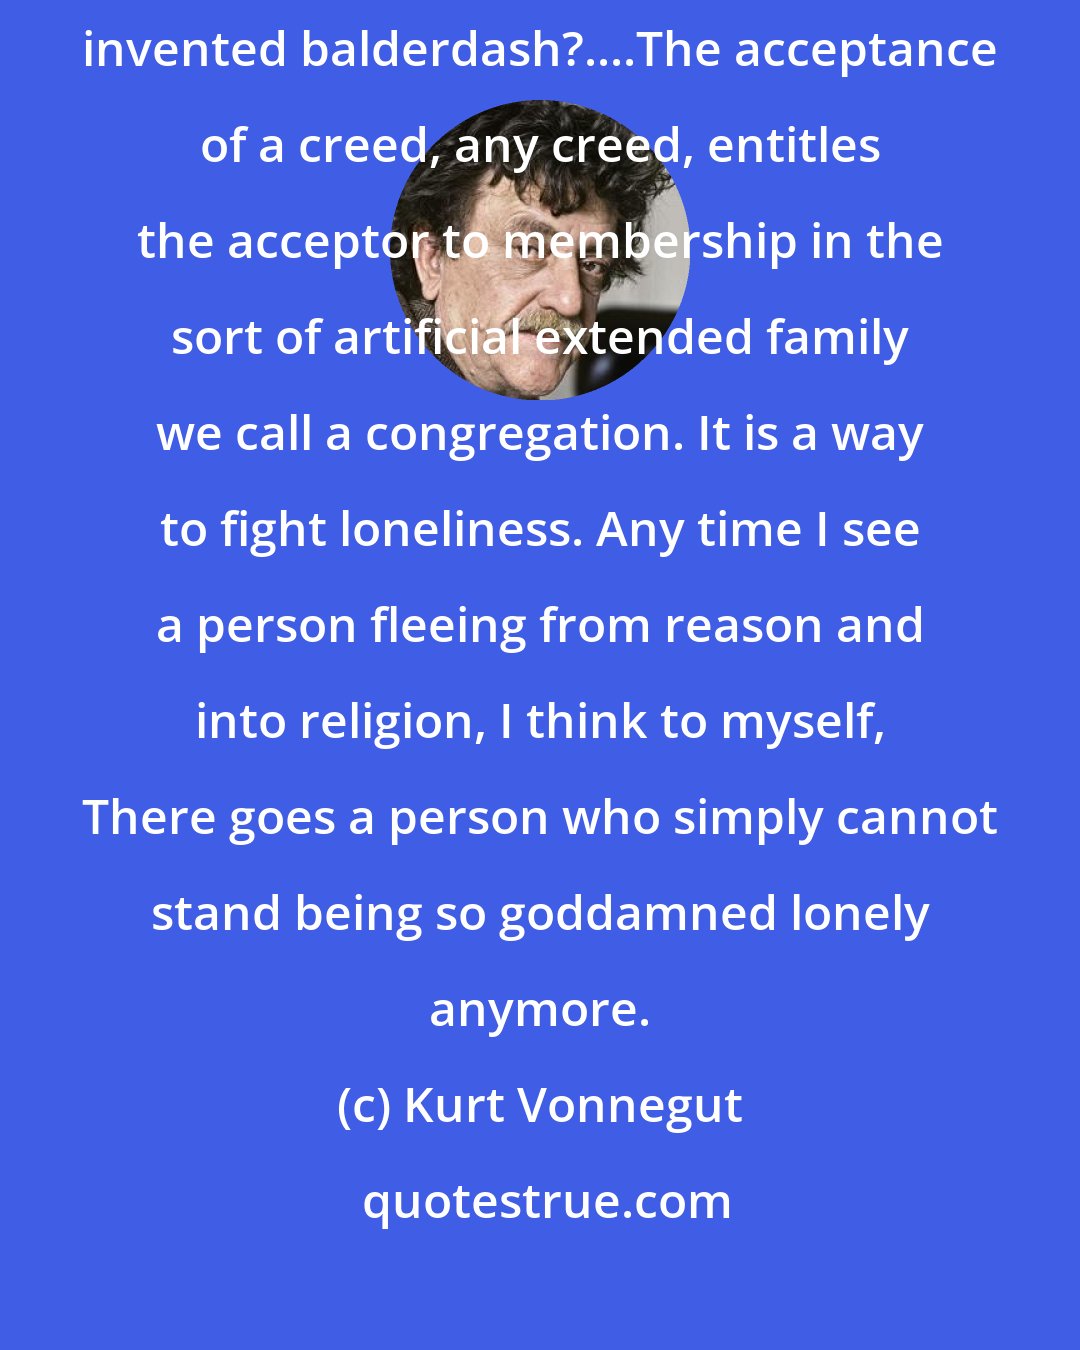 Kurt Vonnegut: How on earth can religious people believe in so much arbitrary, clearly invented balderdash?....The acceptance of a creed, any creed, entitles the acceptor to membership in the sort of artificial extended family we call a congregation. It is a way to fight loneliness. Any time I see a person fleeing from reason and into religion, I think to myself, There goes a person who simply cannot stand being so goddamned lonely anymore.